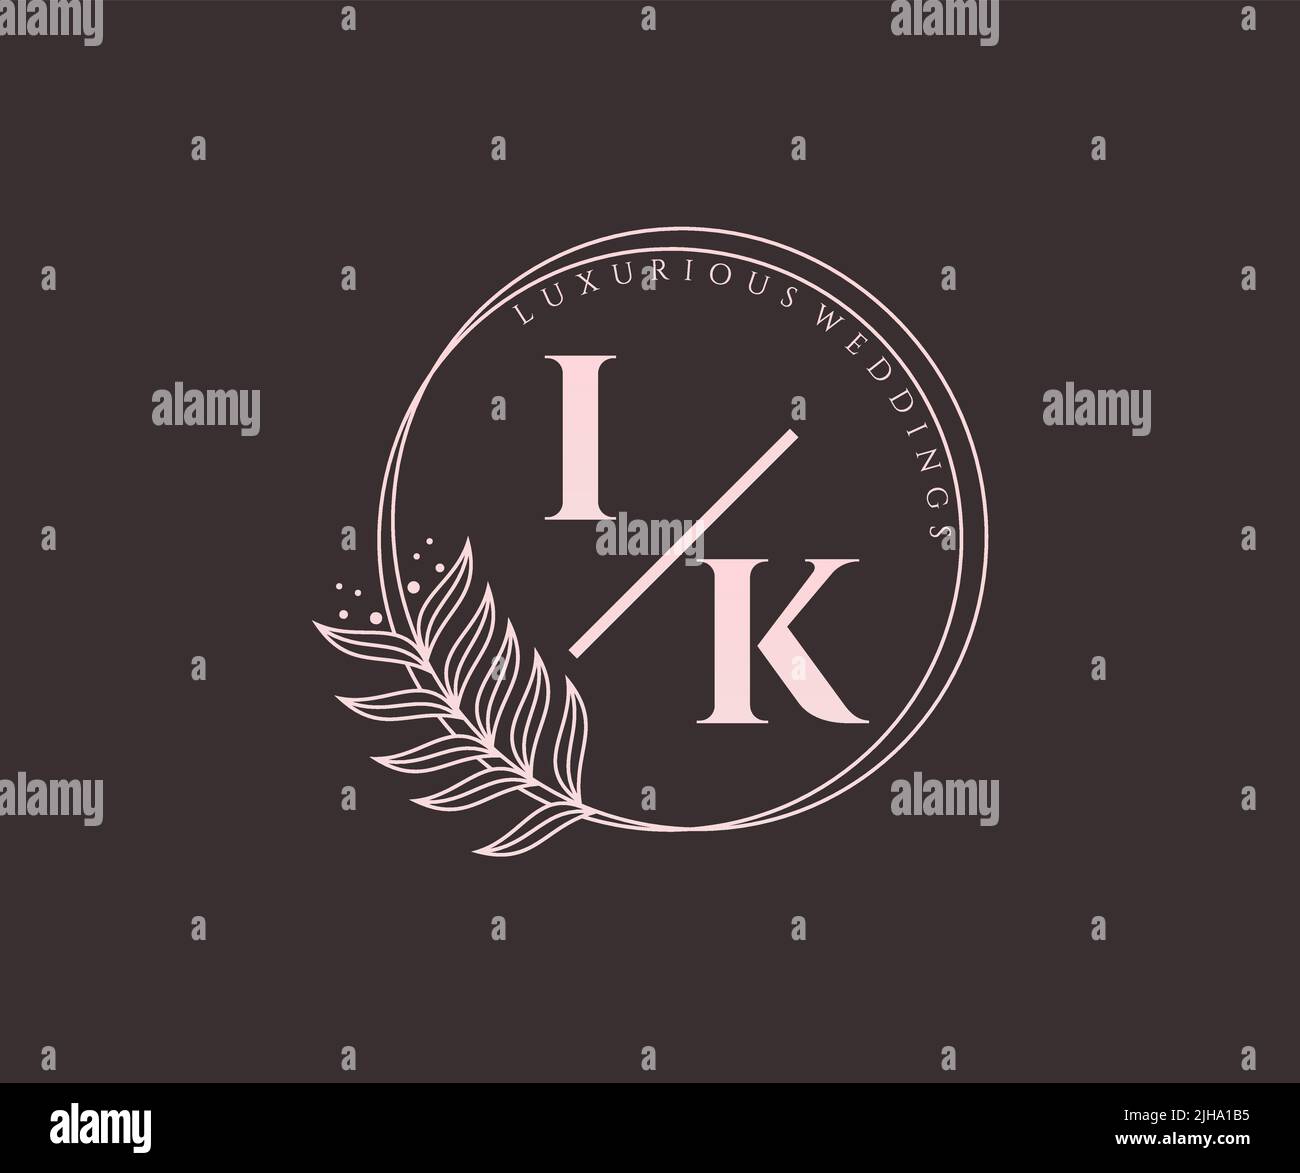 IK Initials letter Wedding monogram logos template, hand drawn modern minimalistic and floral templates for Invitation cards, Save the Date, elegant Stock Vector